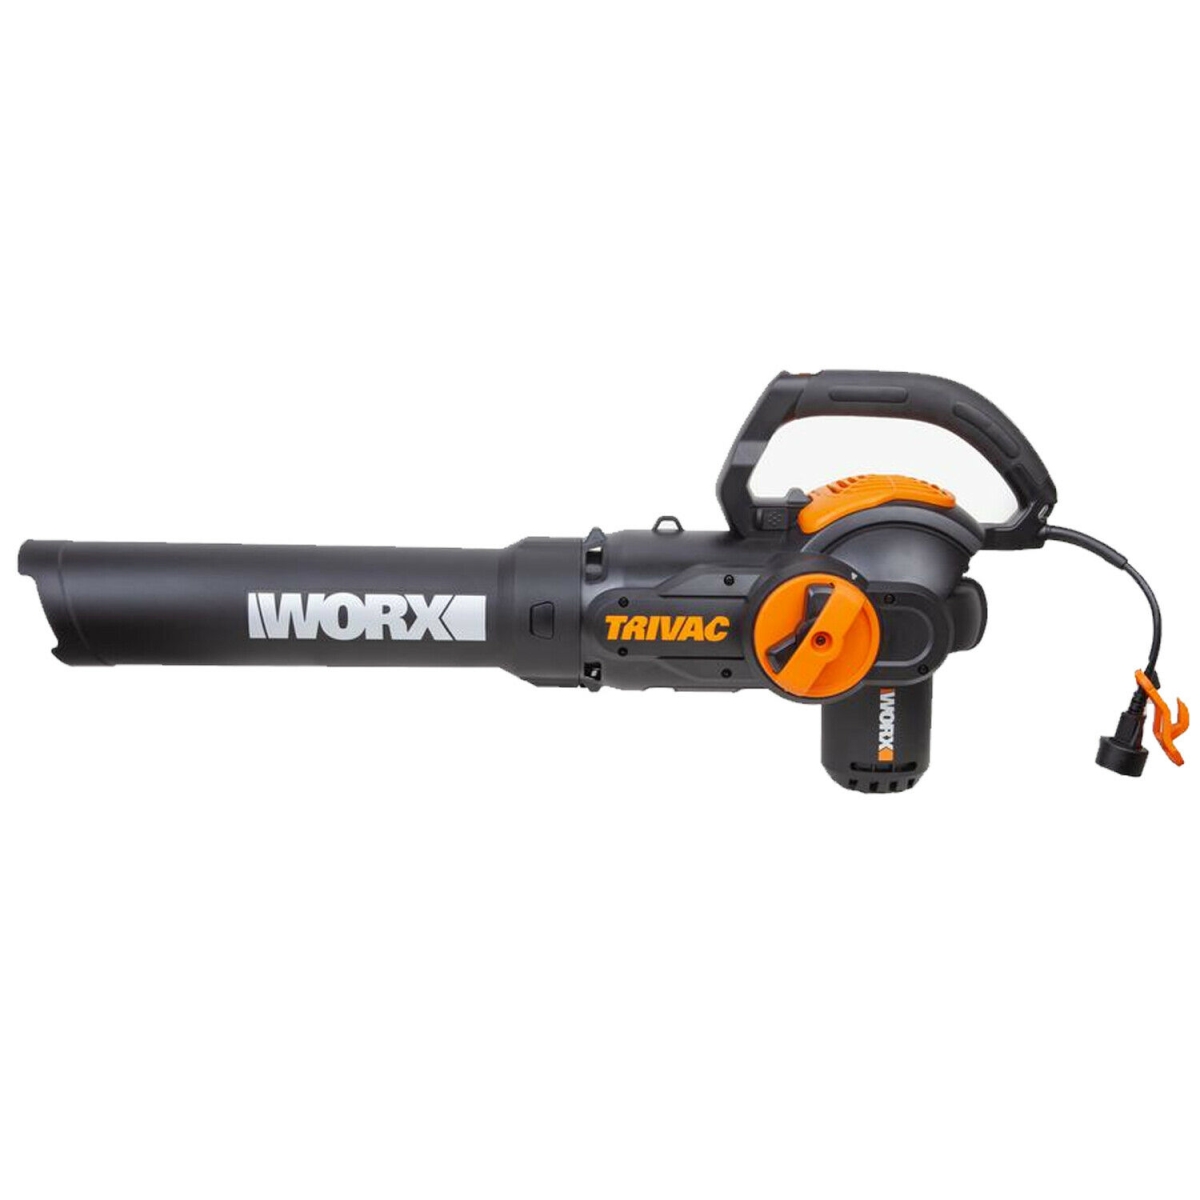 Pipers Pit 600 CFM 3-in-1 Trivac 2 Speed Electric Leaf Blower